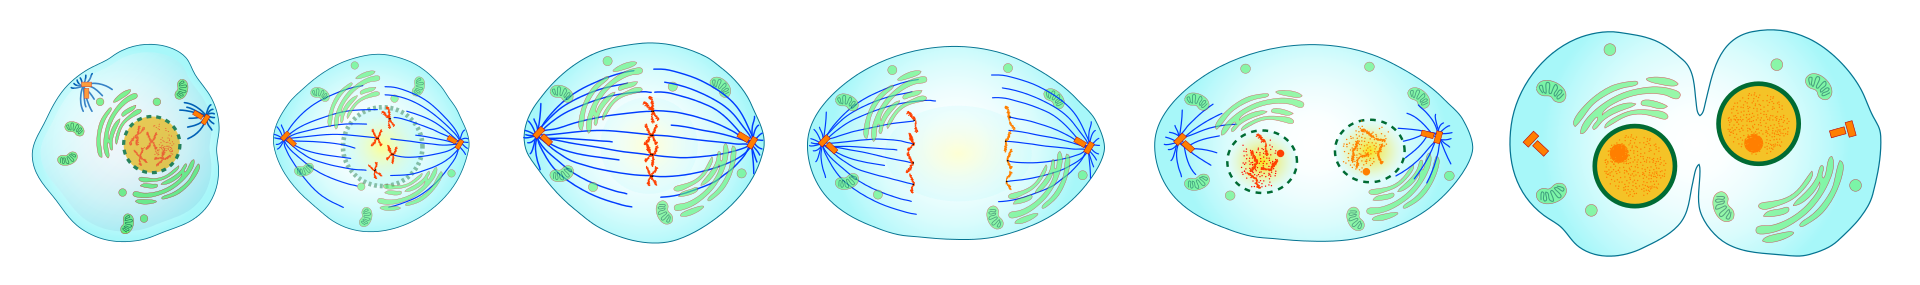 1920px-Mitosis_cells_sequence.svg.png